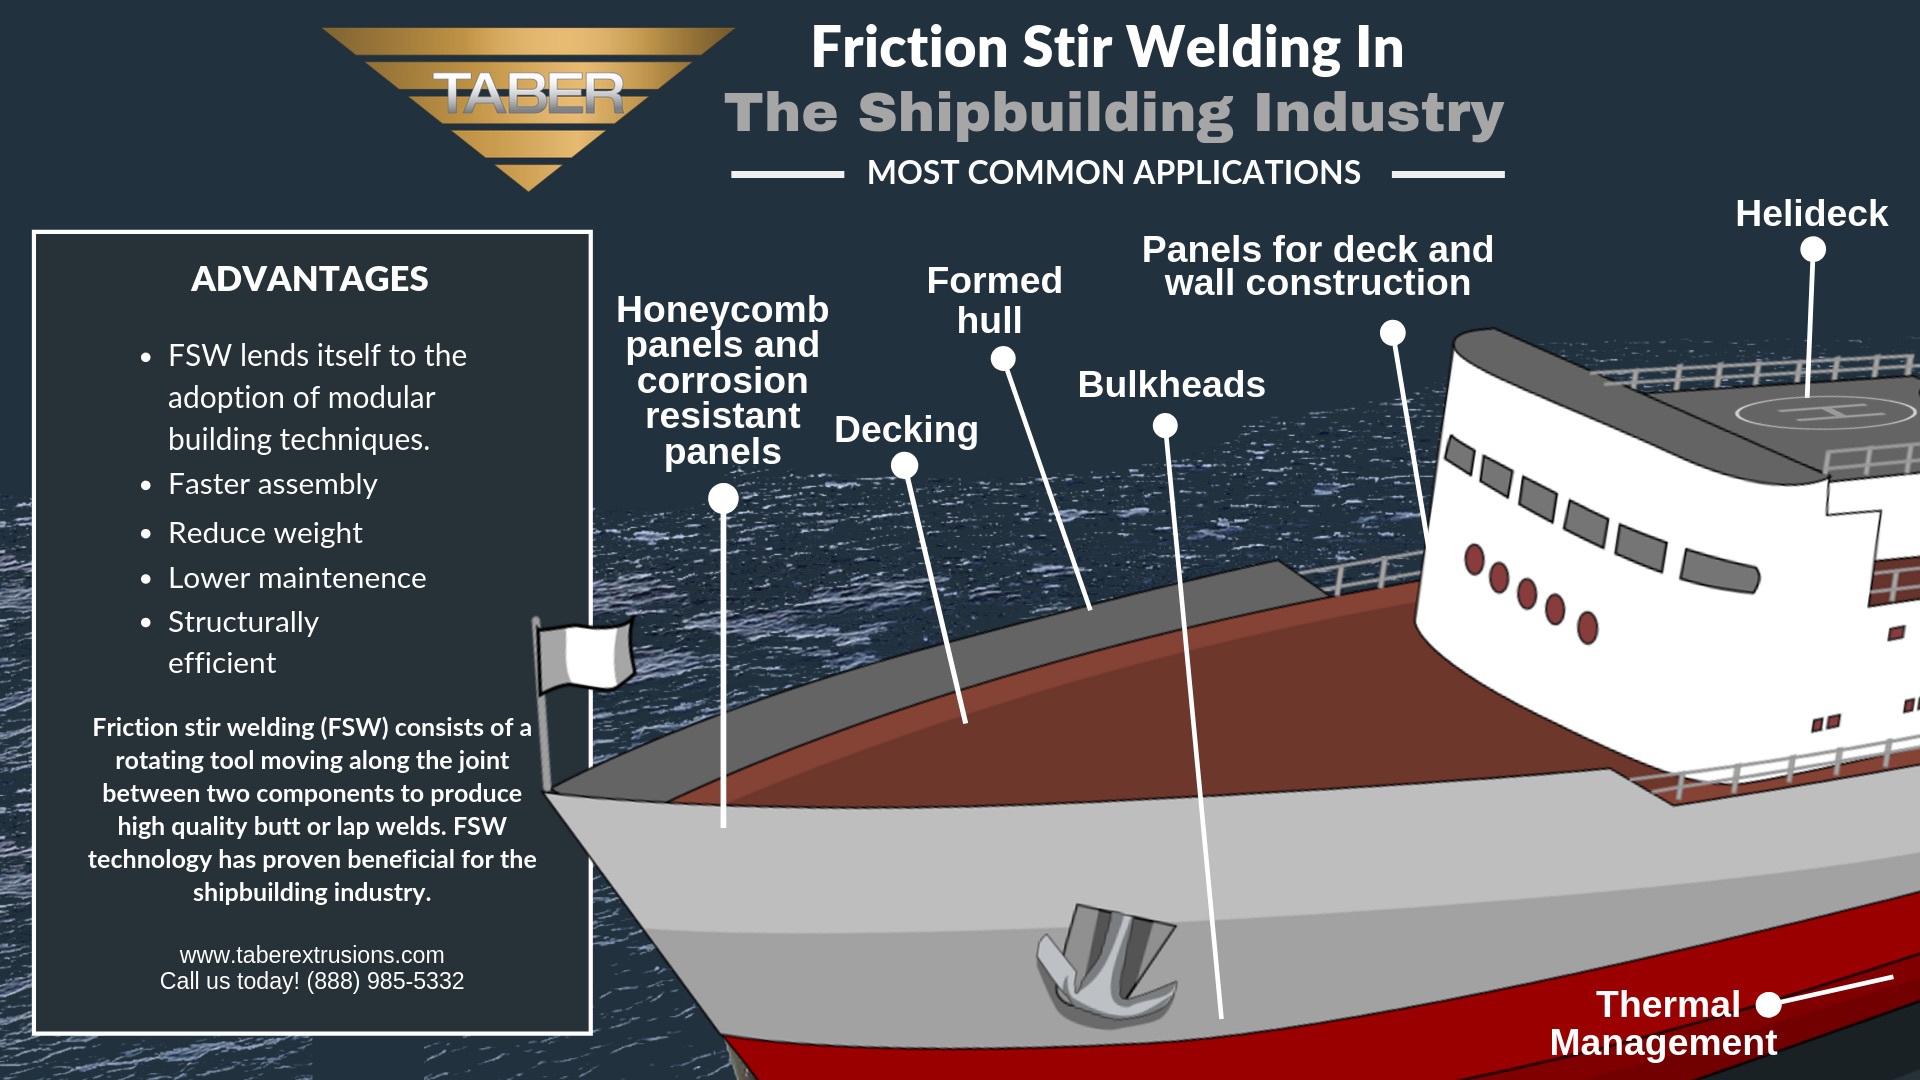 Friction Stir Welding In The Shipbuilding Industry Infographic containing most common applications of thermal management, helideck, wall panels, bulkheads, hull, decking, and honeycomb panels